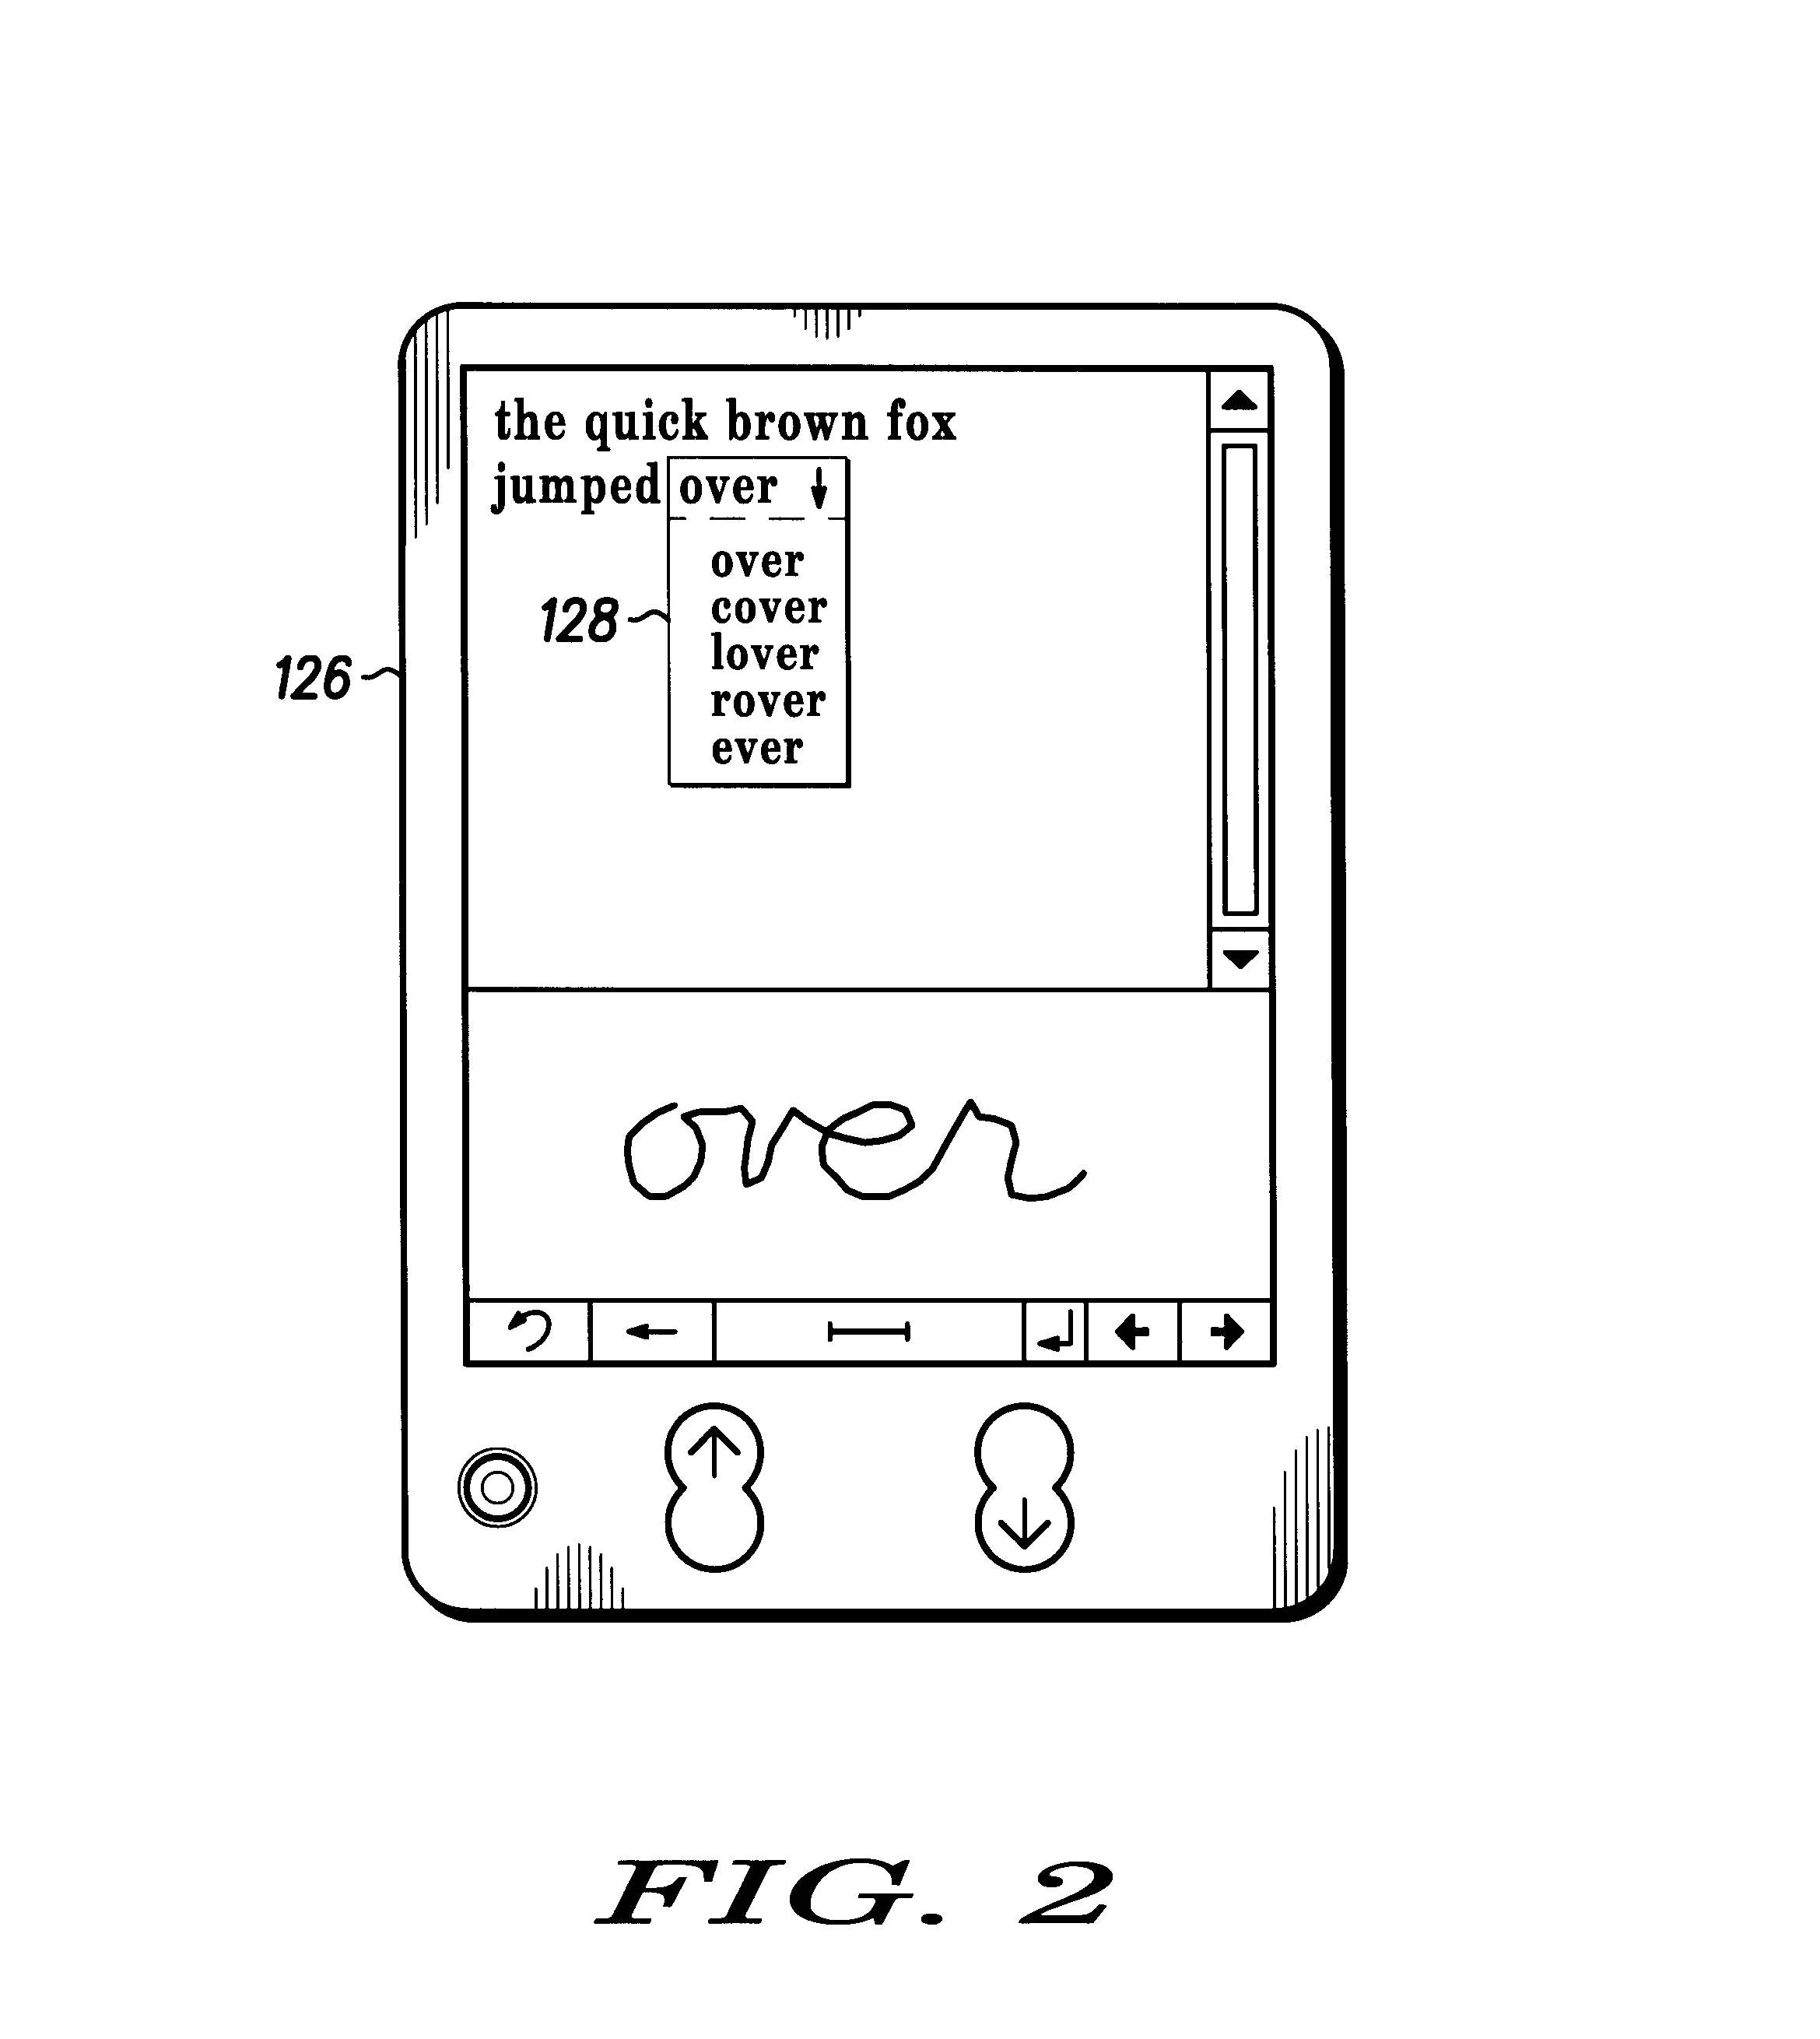 Automatically scrolling handwritten input user interface for personal digital assistants and the like